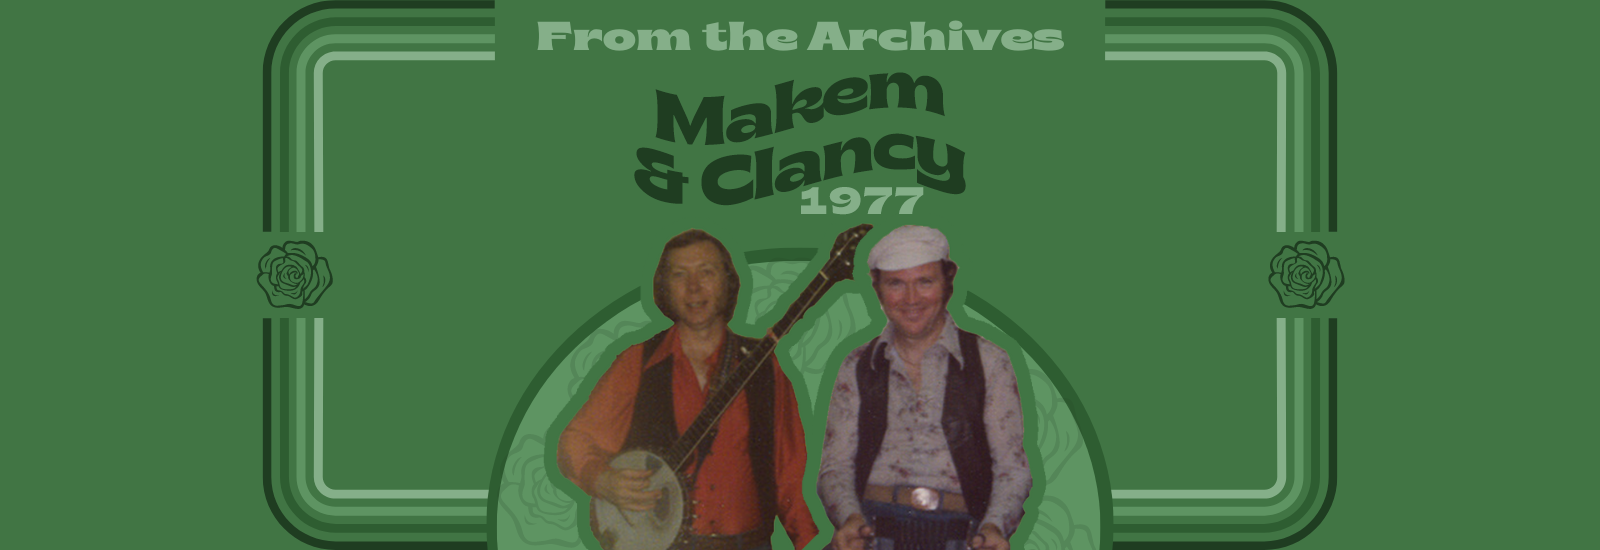 Makem and Clancy 1977 #106